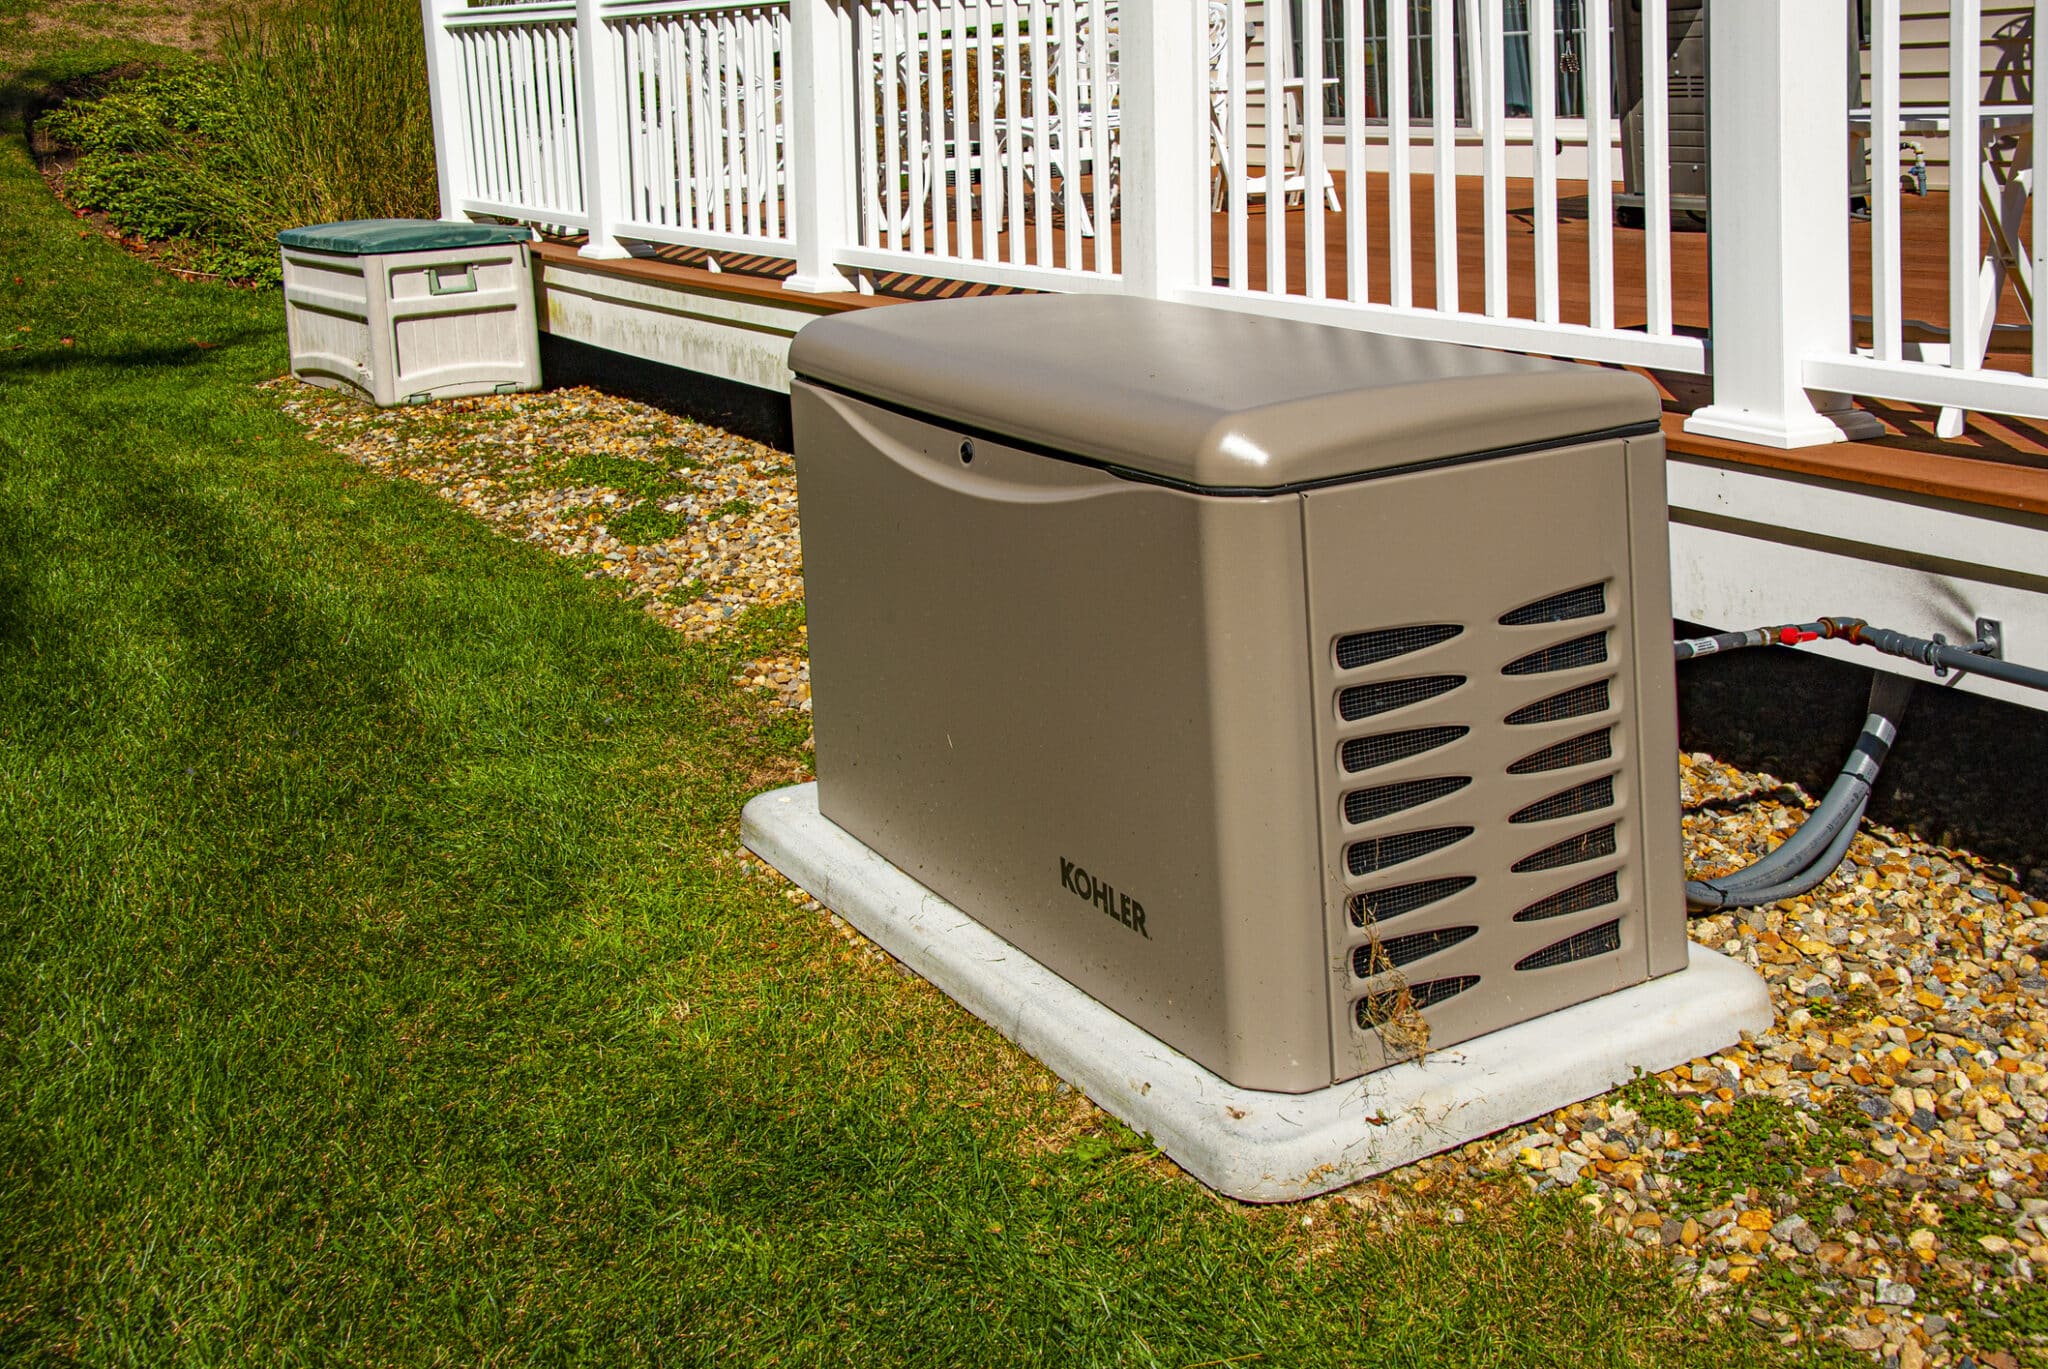 Residential standby generator on concrete pad